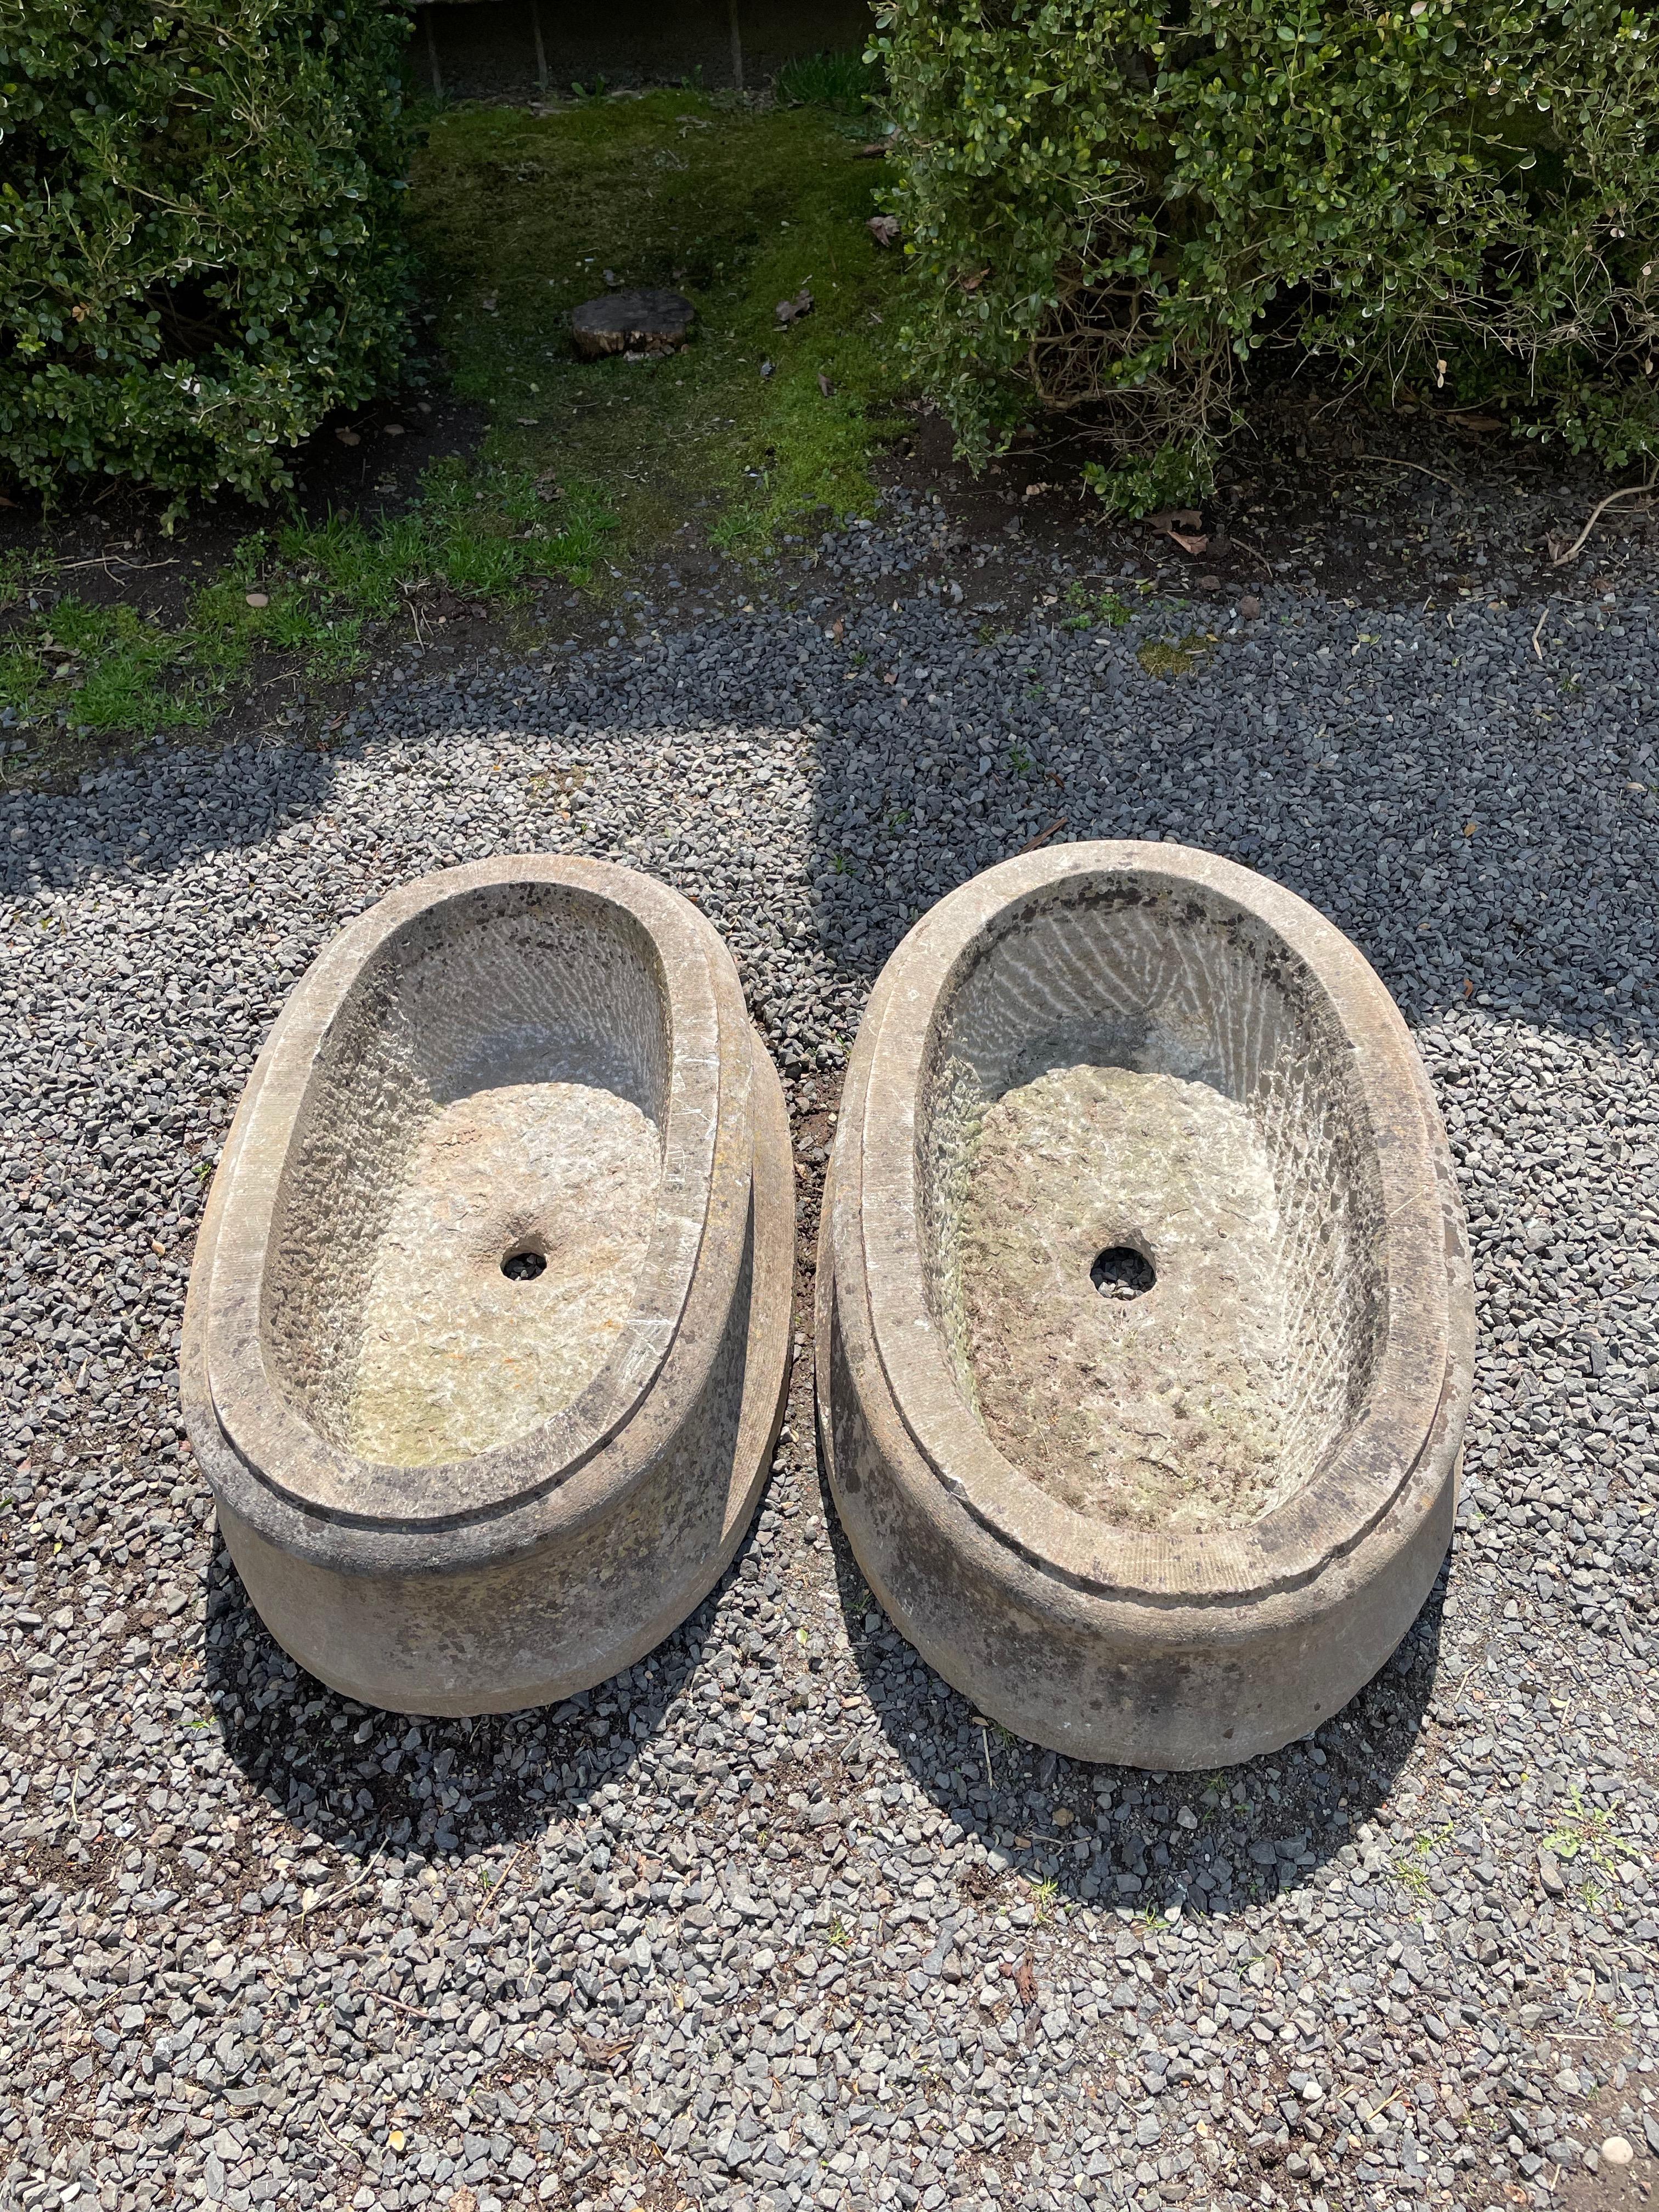 These flaring oval-shaped jardinieres were hand-carved in the early 19th C from Belgian bluestone that is extremely hard and durable. Both are in lovely antique condition and they are near-enough in size to look like a pair when planted. Elegant in